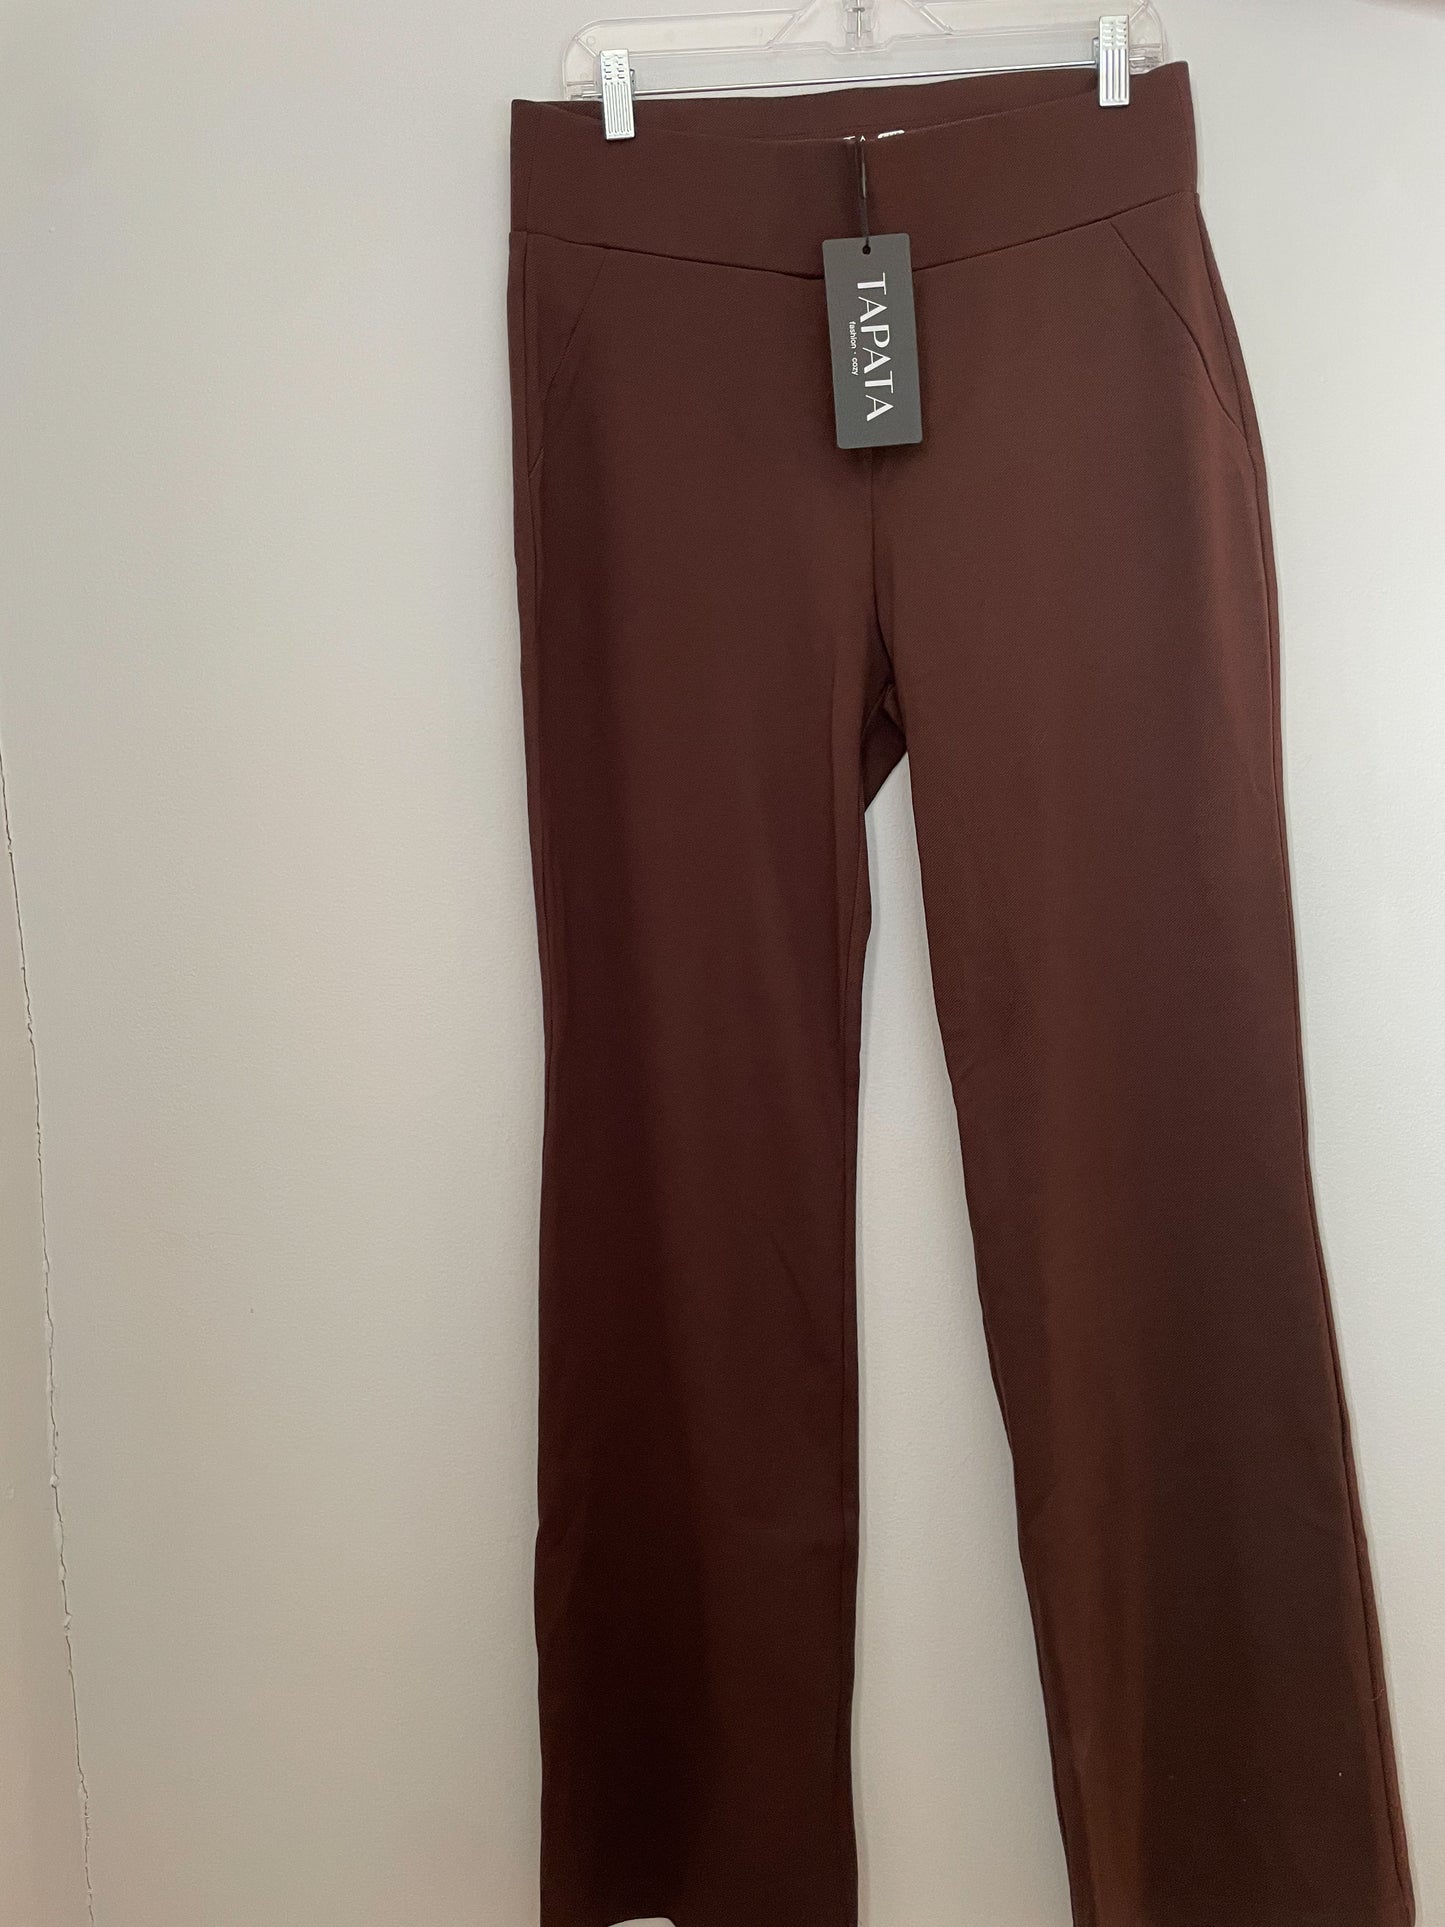 Tapata Brown High Waist Wide Leg Stretch Knit Pants NWT - Size 12 Large